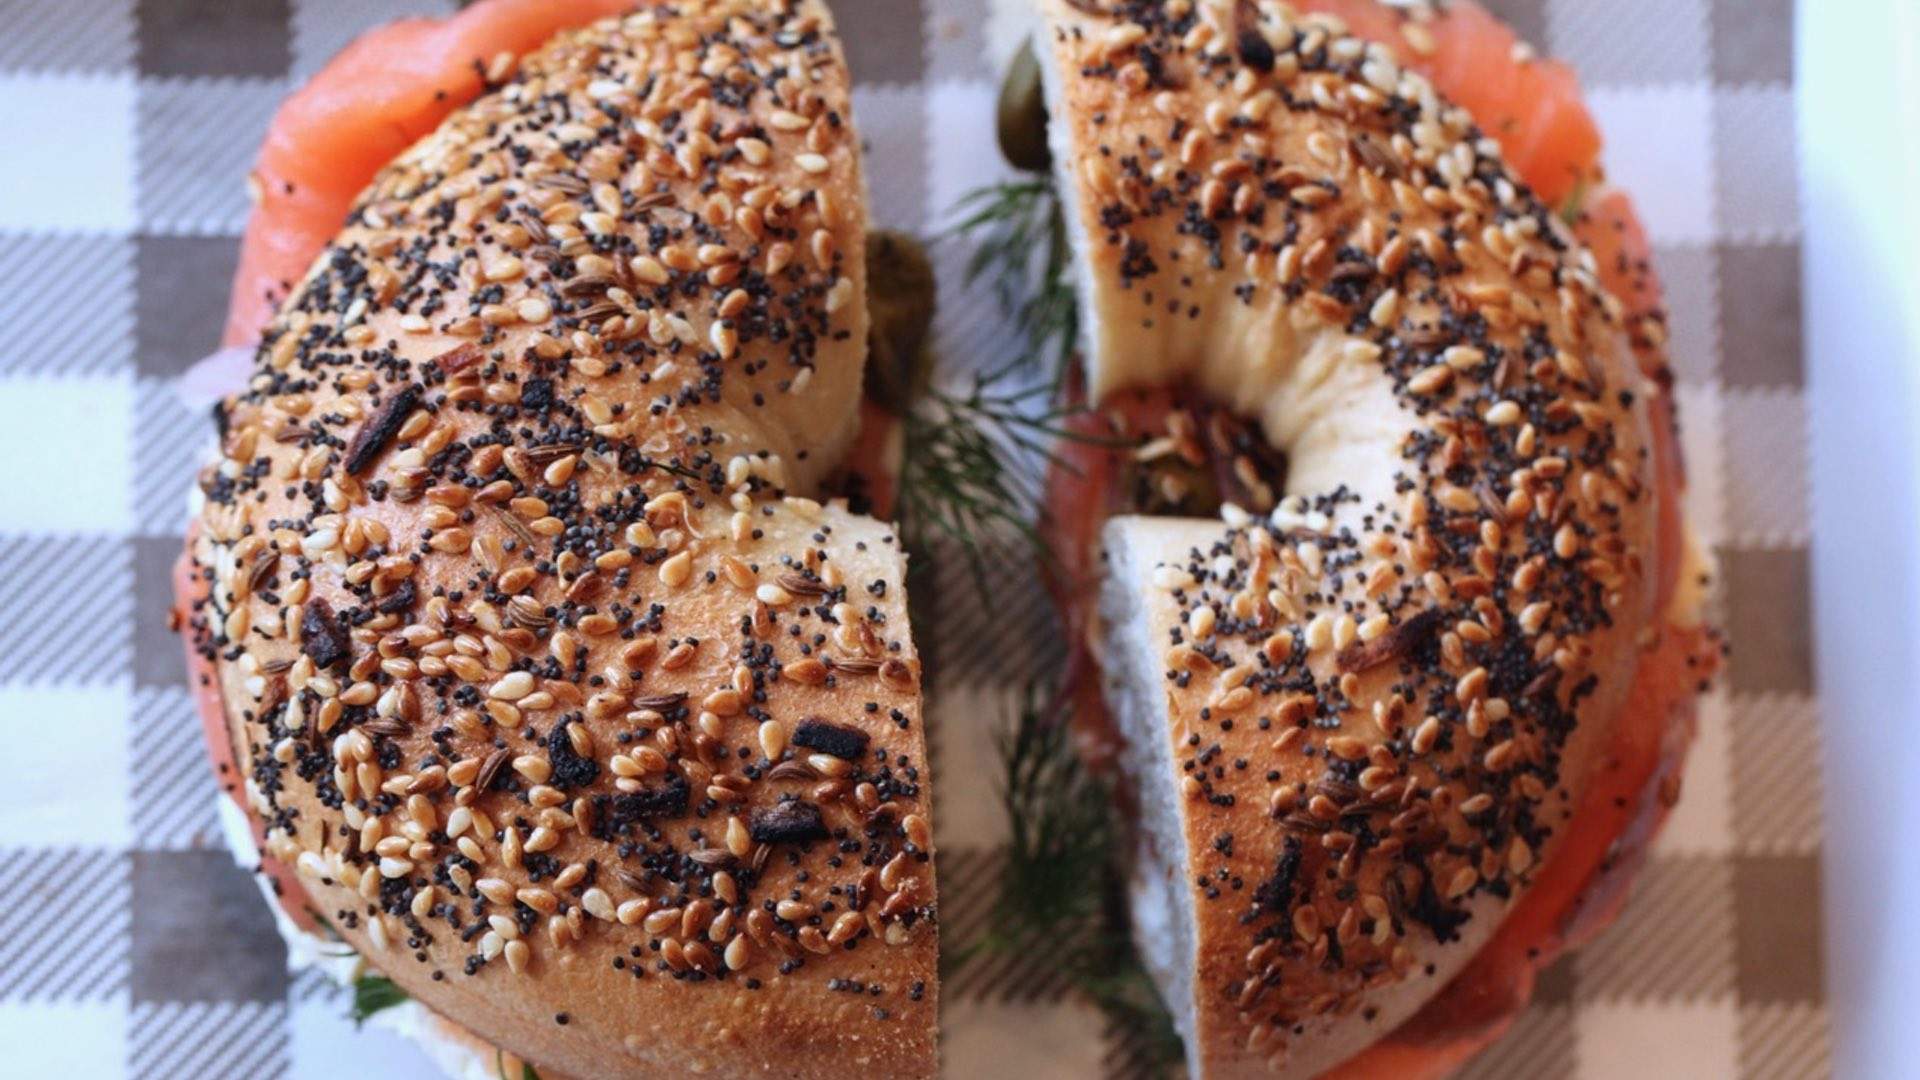 Brooklyn Boy Bagels Has Opened a NYC-Style Bagelry and Deli in Circular Quay